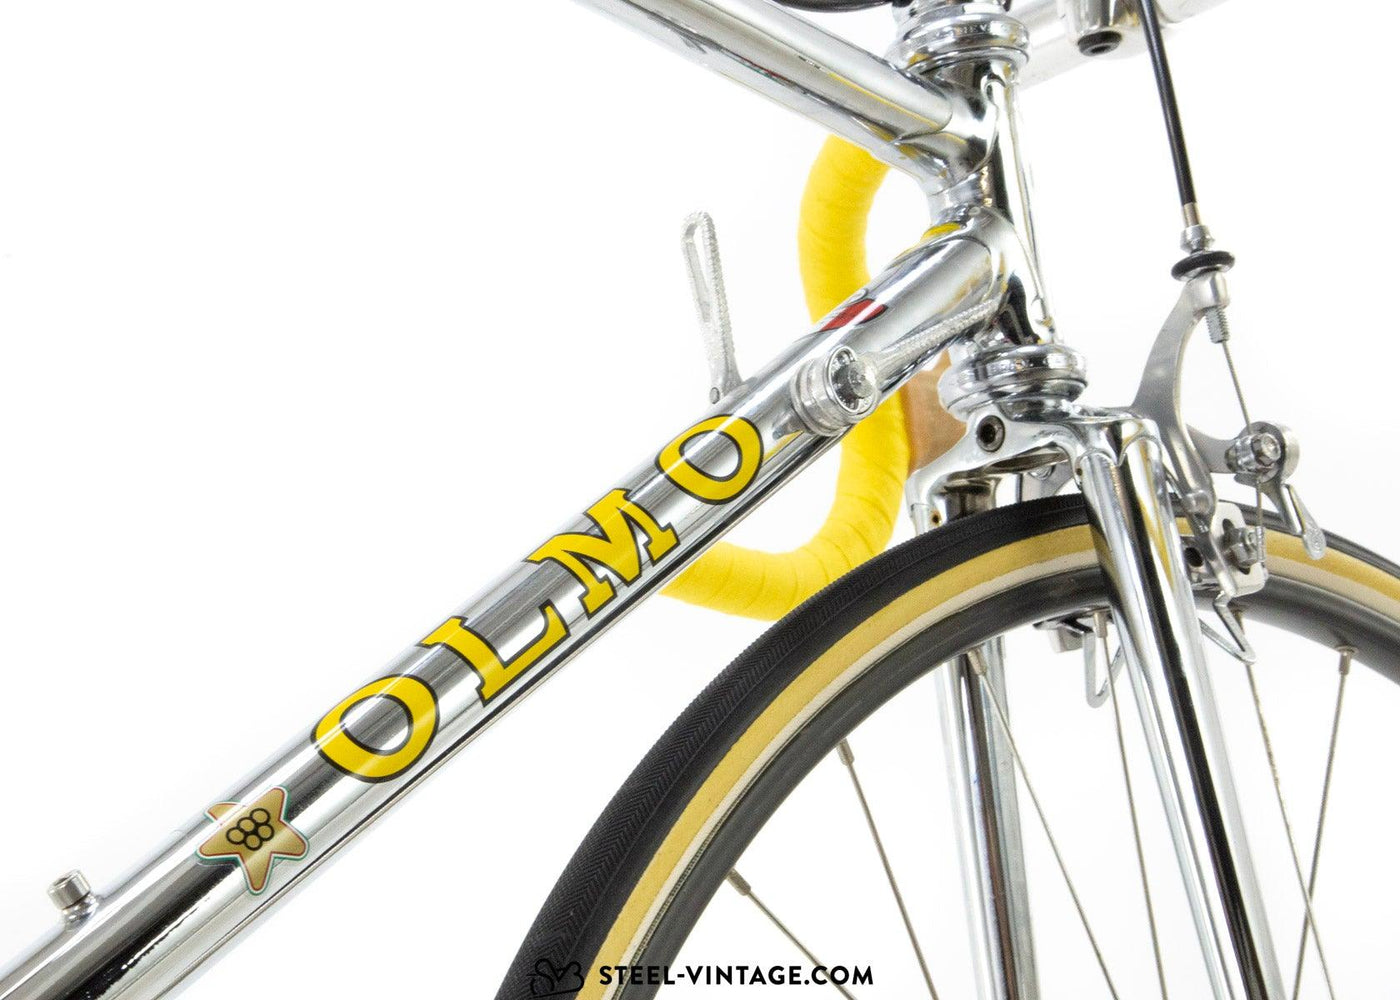 Olmo Competition Cromato Classic Road Bicycle 1970s - Steel Vintage Bikes